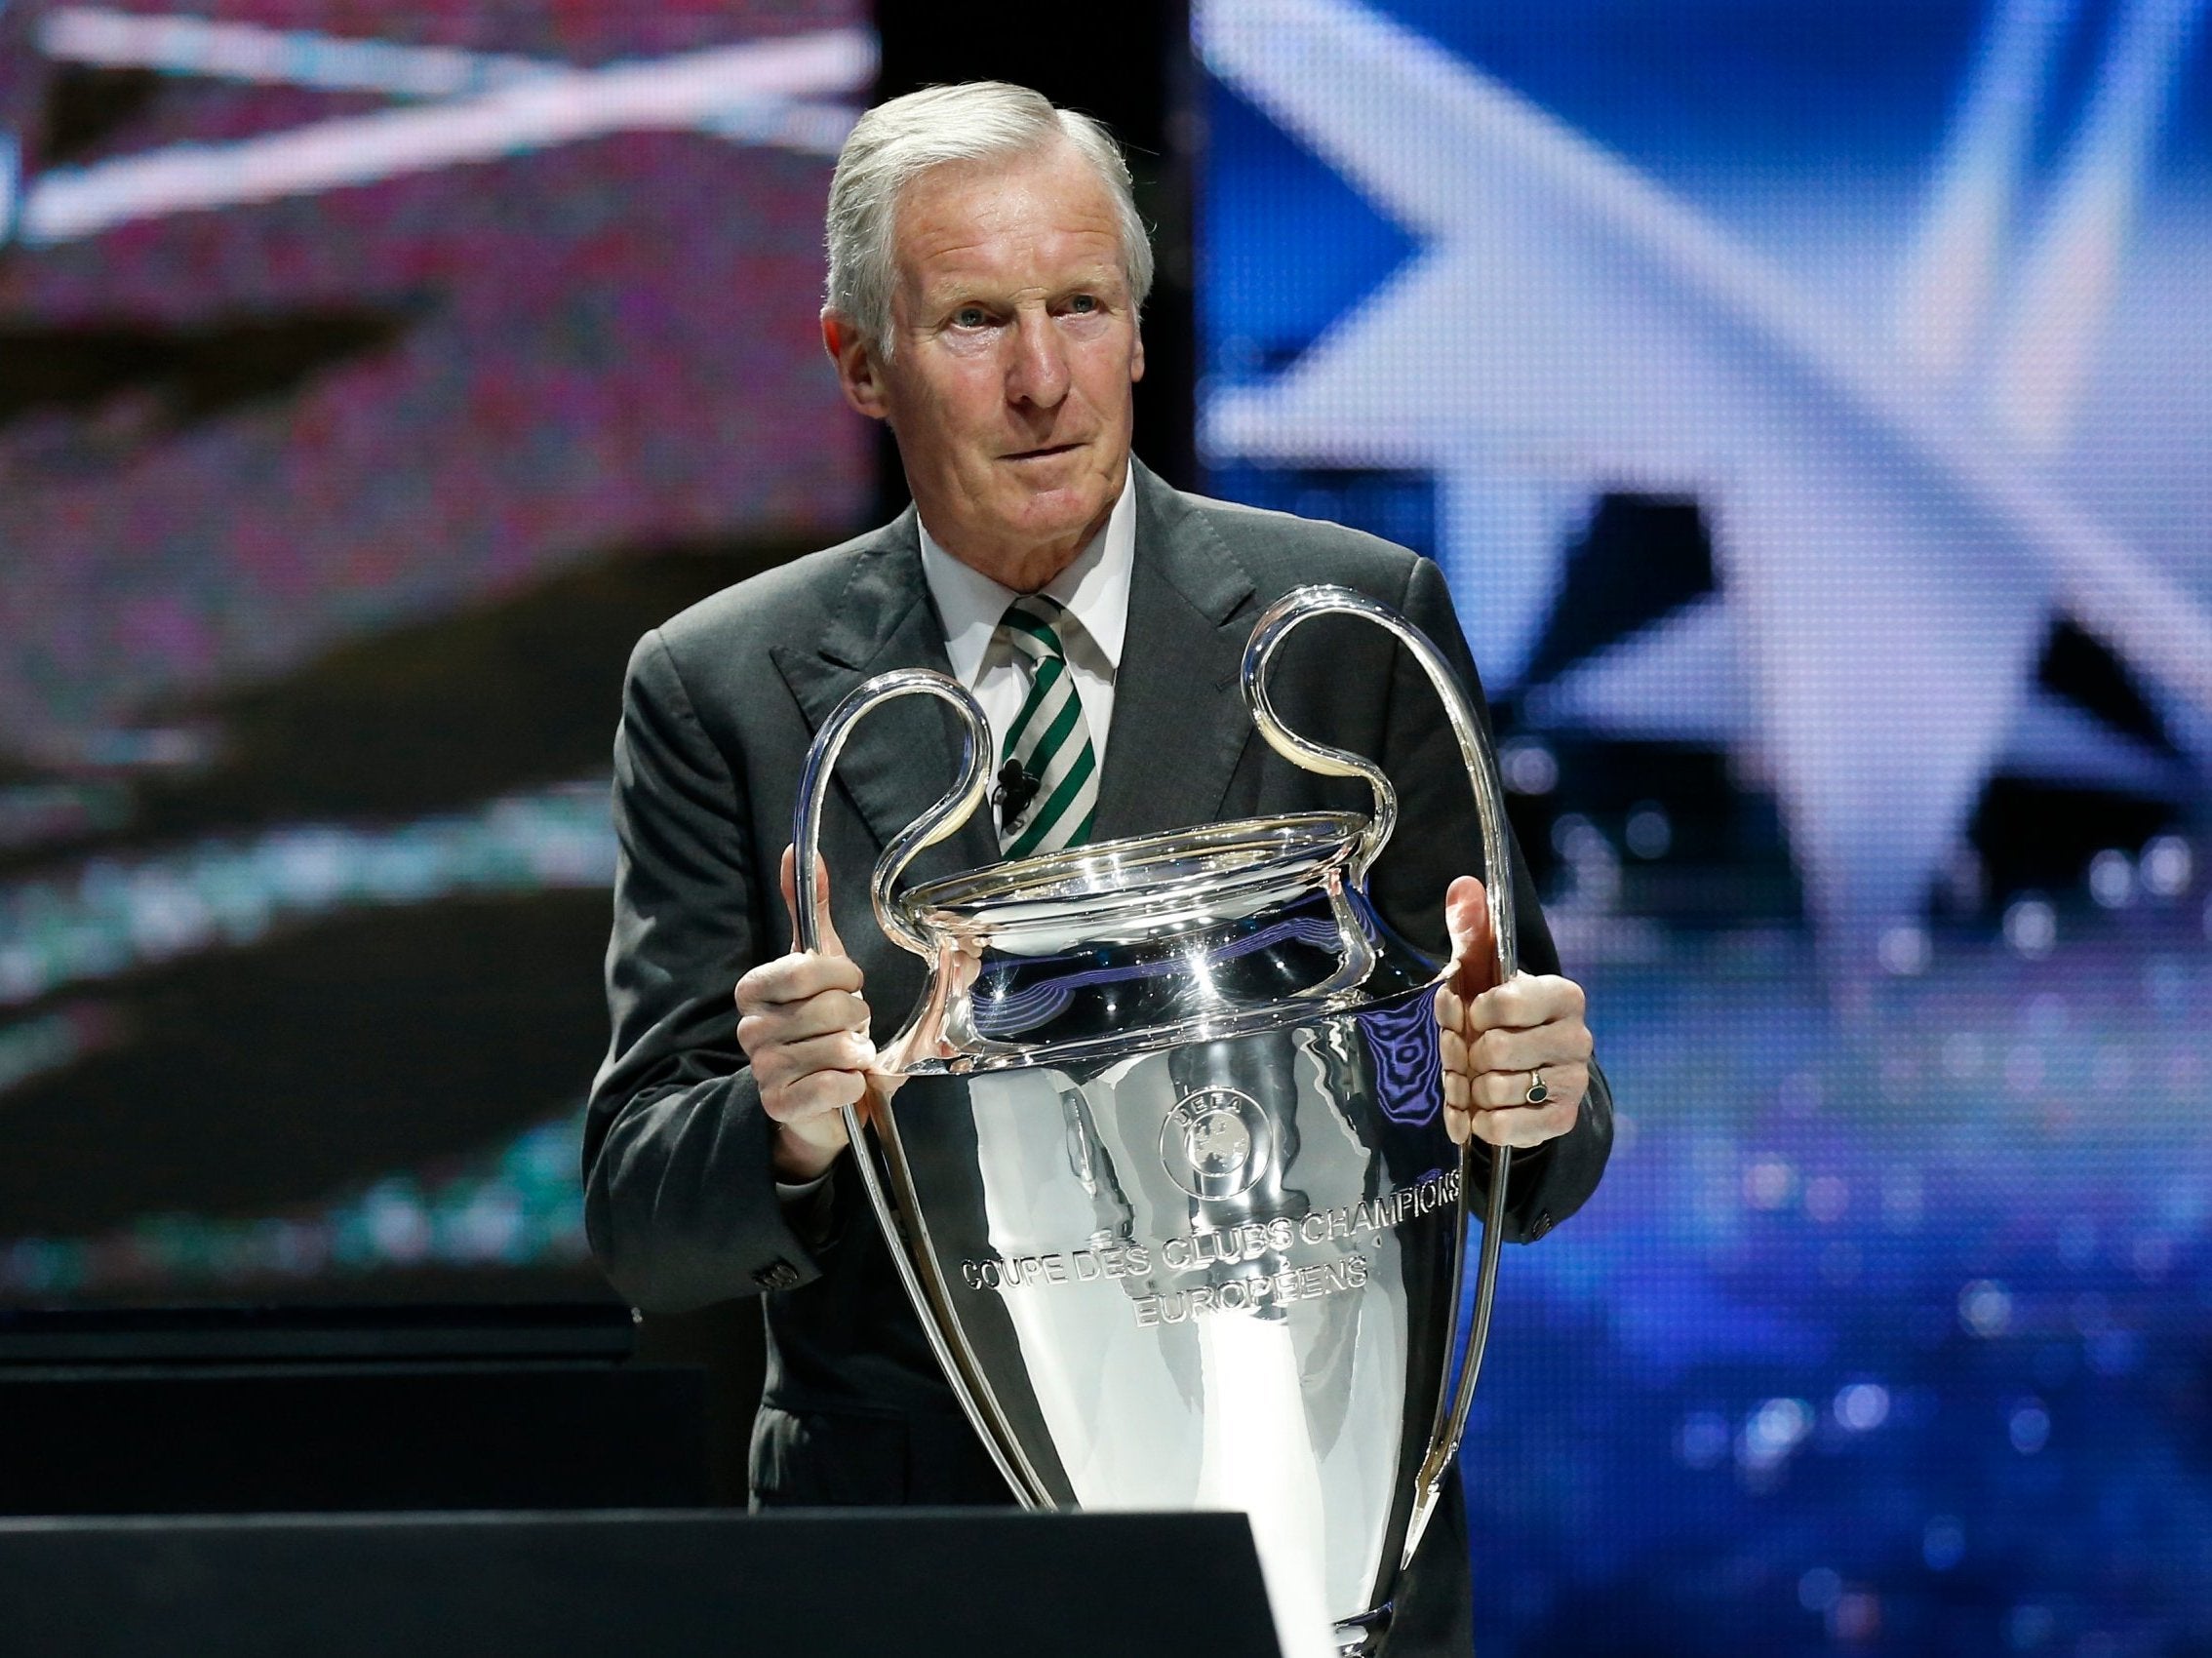 Billy McNeill at the 2013/14 Champions League group stage draw